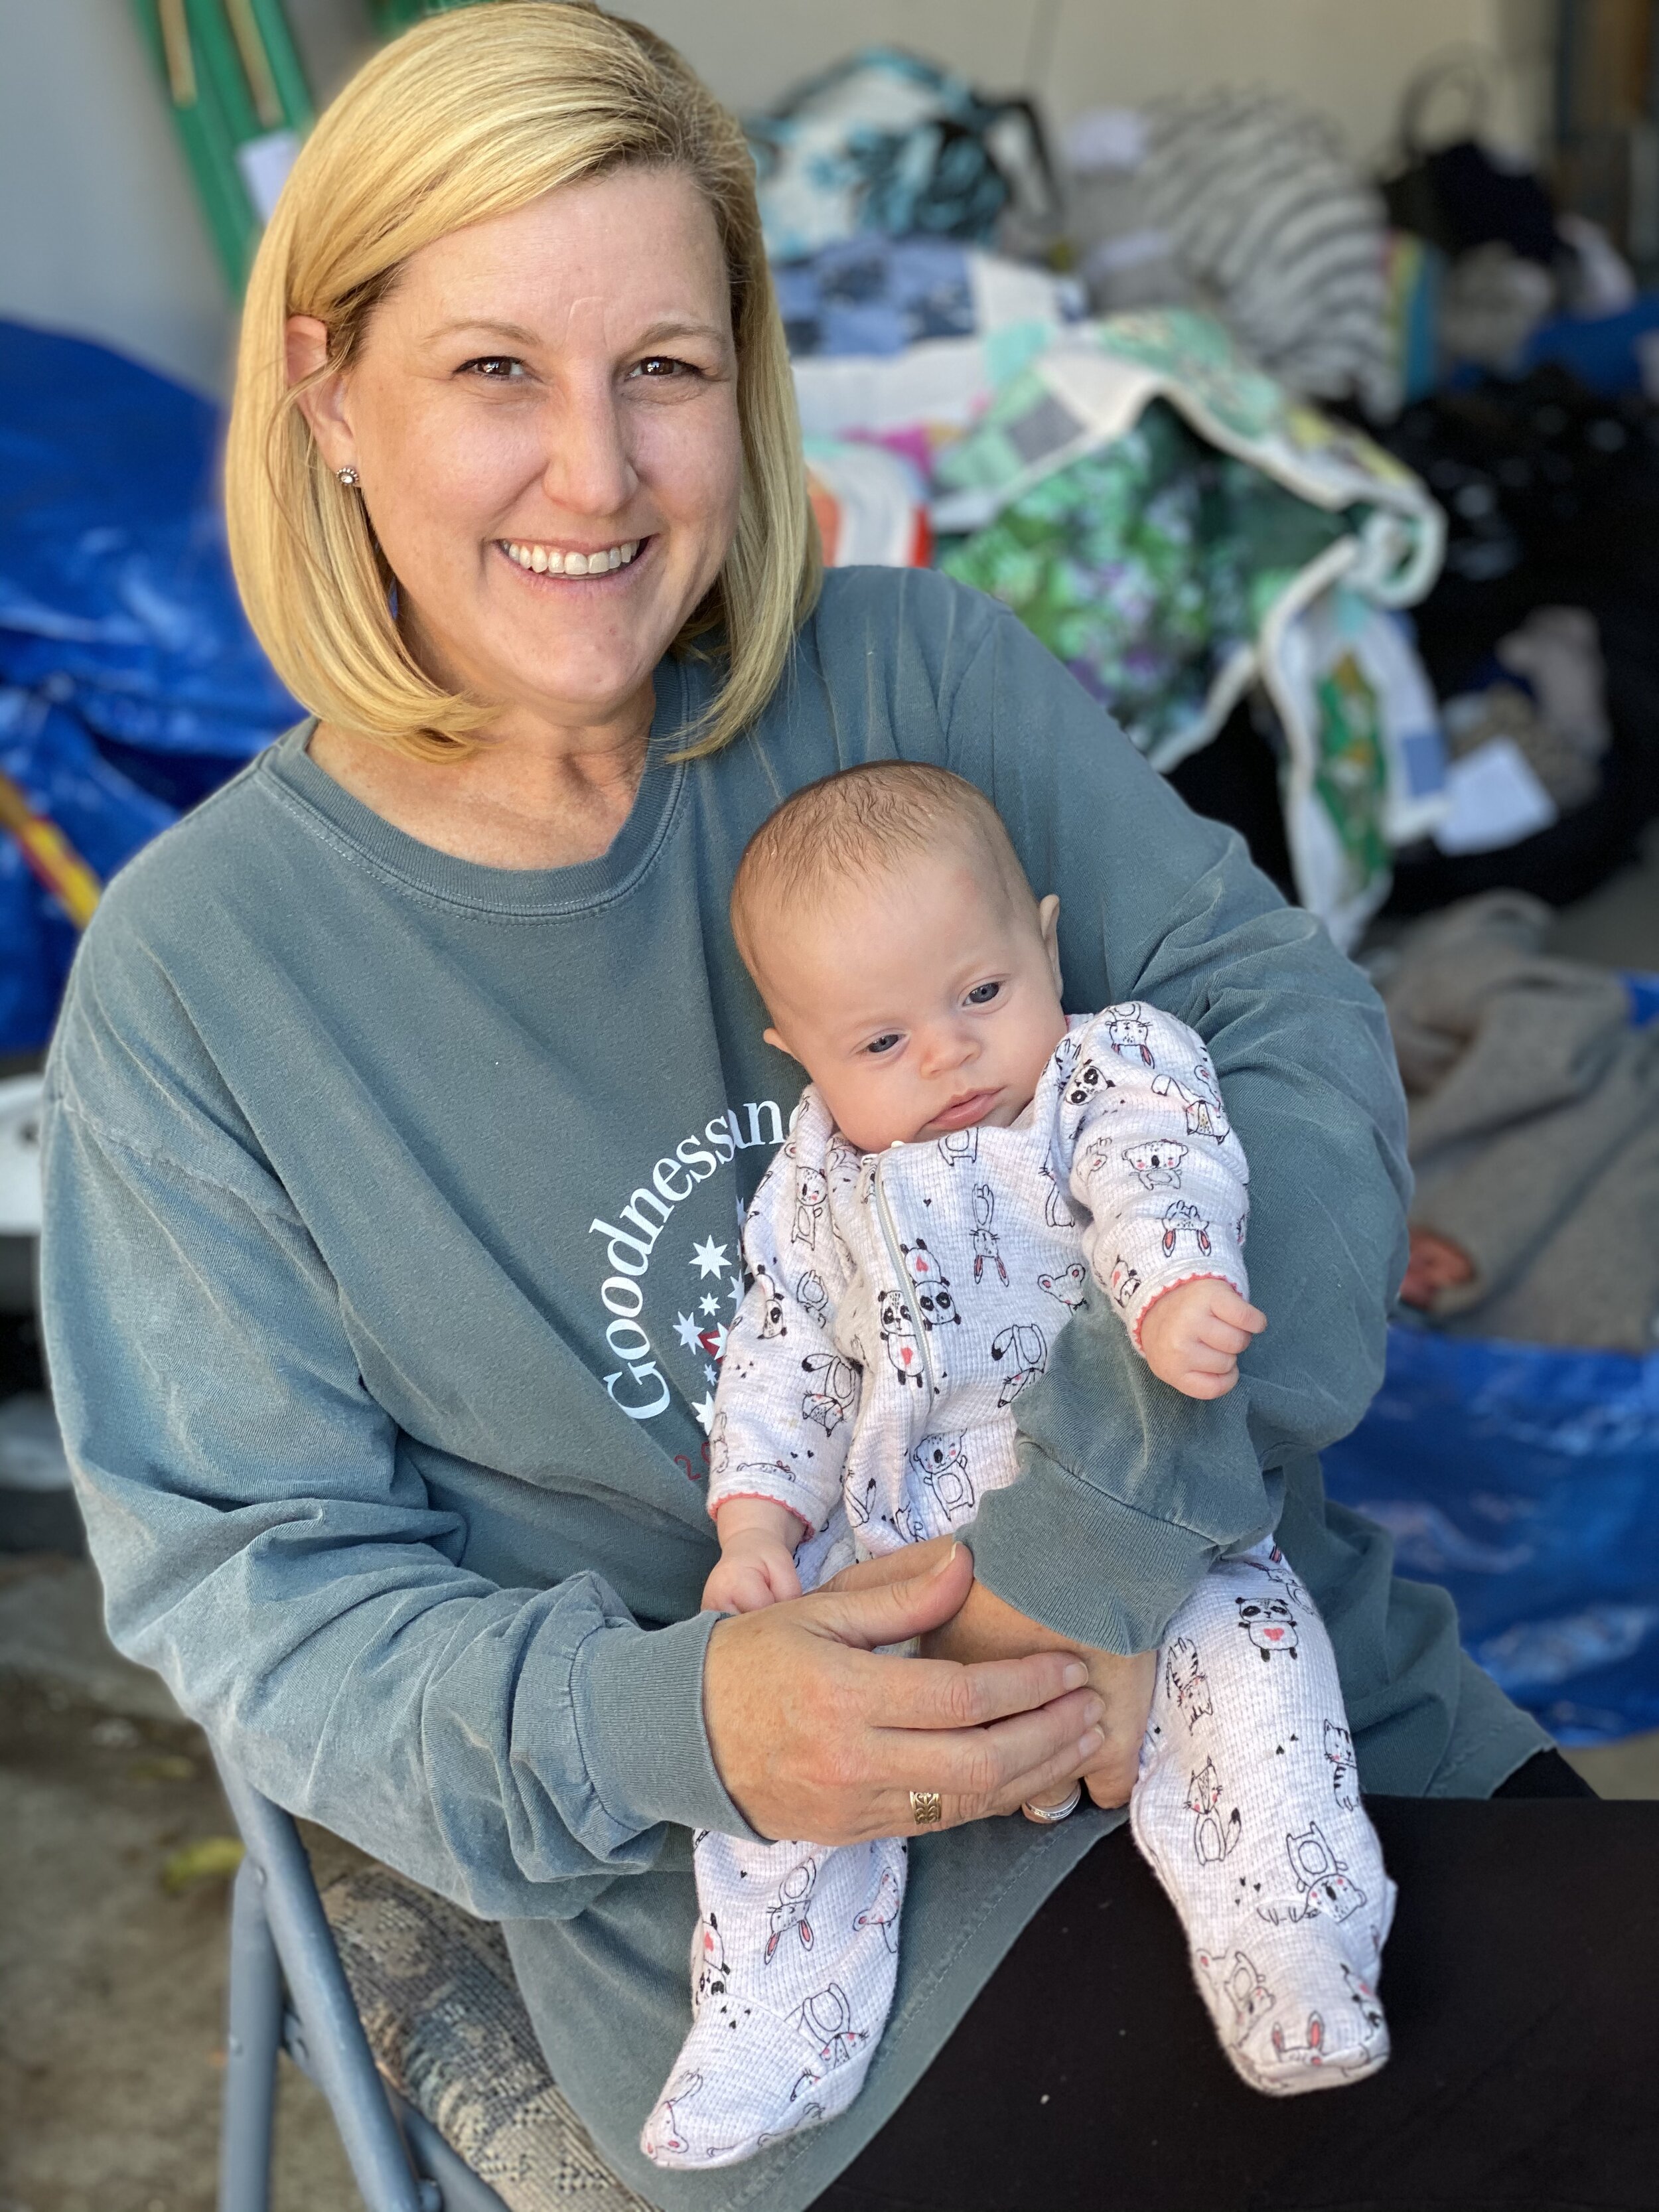  Elizabeth's sister, Cheryl, has opened up her Plano home to sort through all of the items that were packed up after the tornado.    